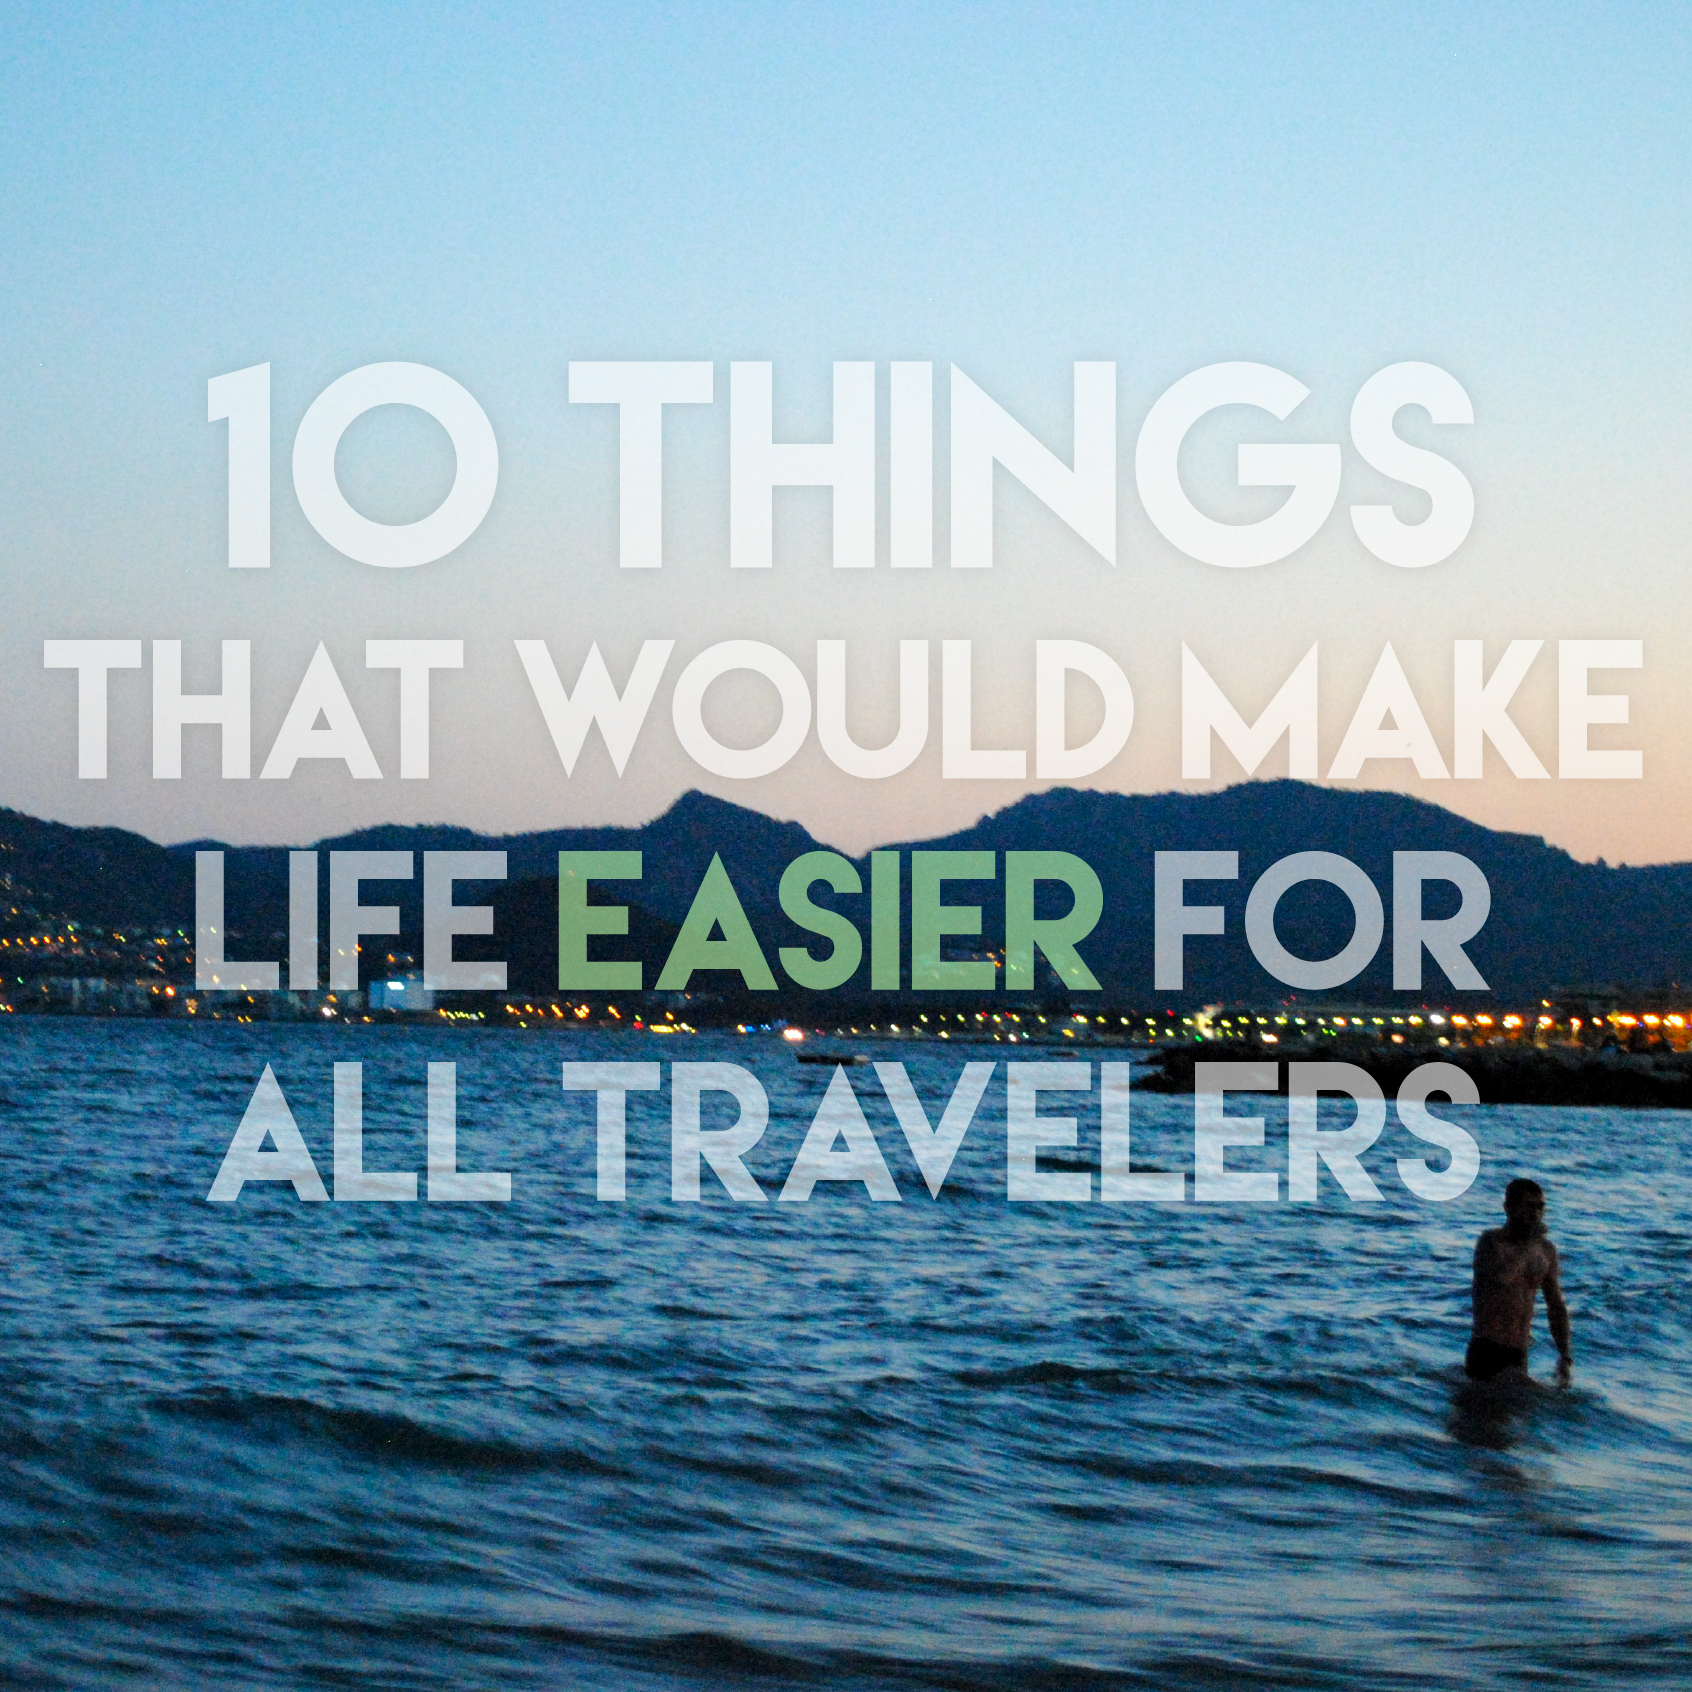 10 Things That Would Make Life Easier for All Travelers